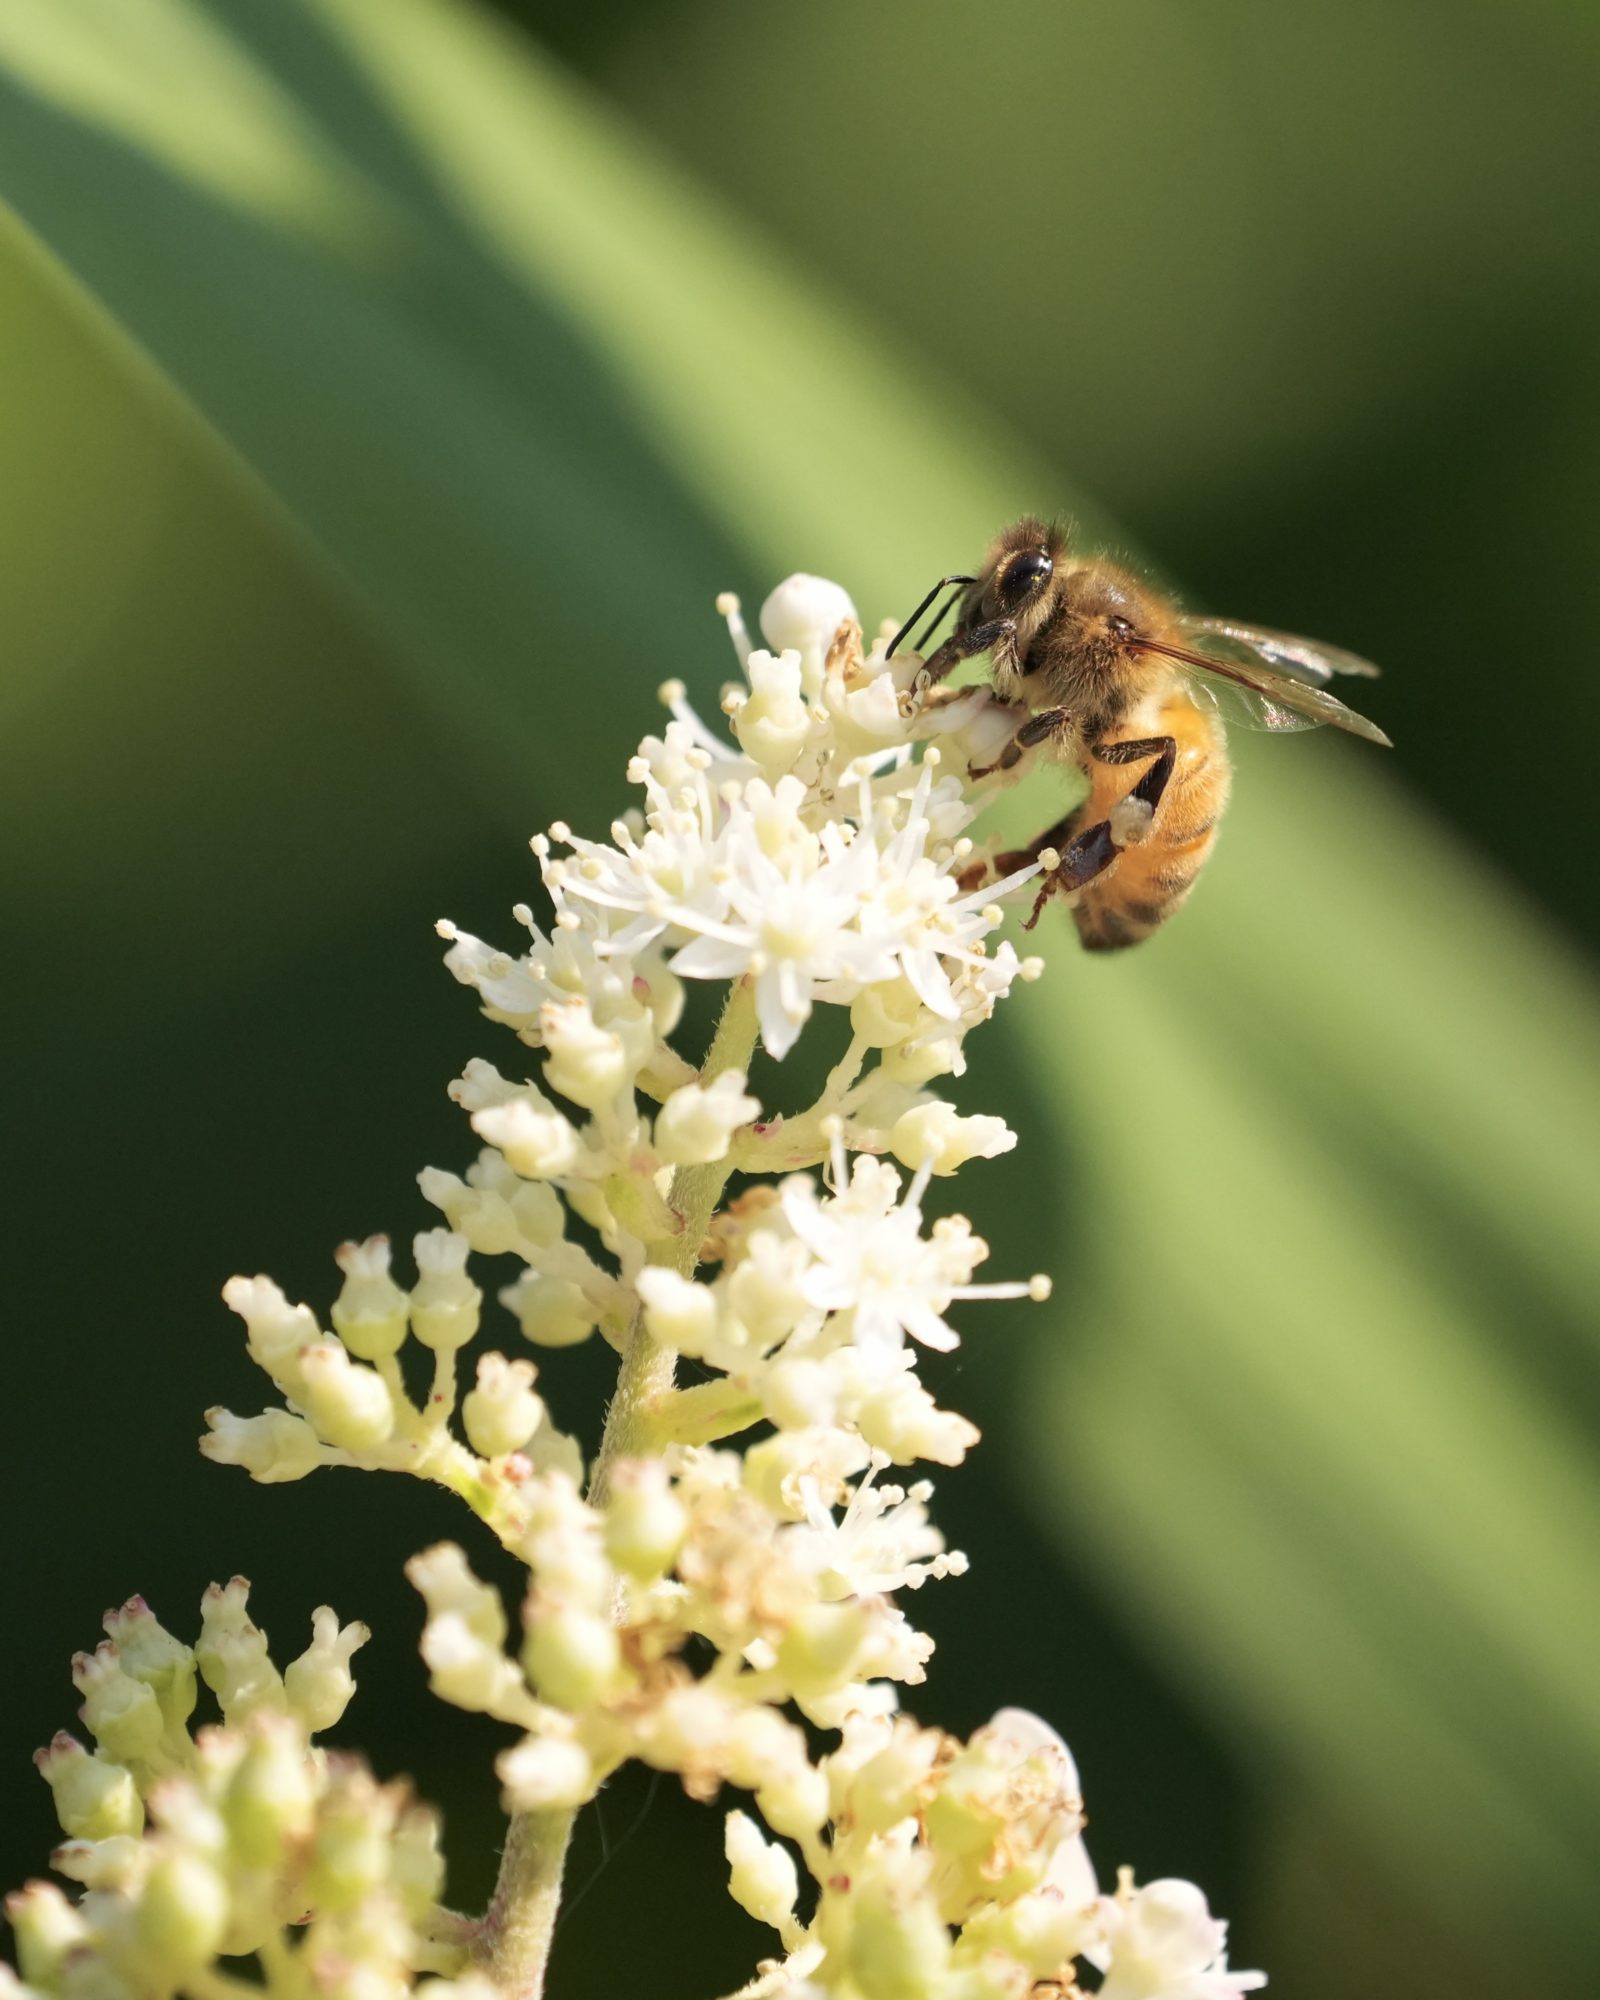 A honeybee on a stalk of small white flowers